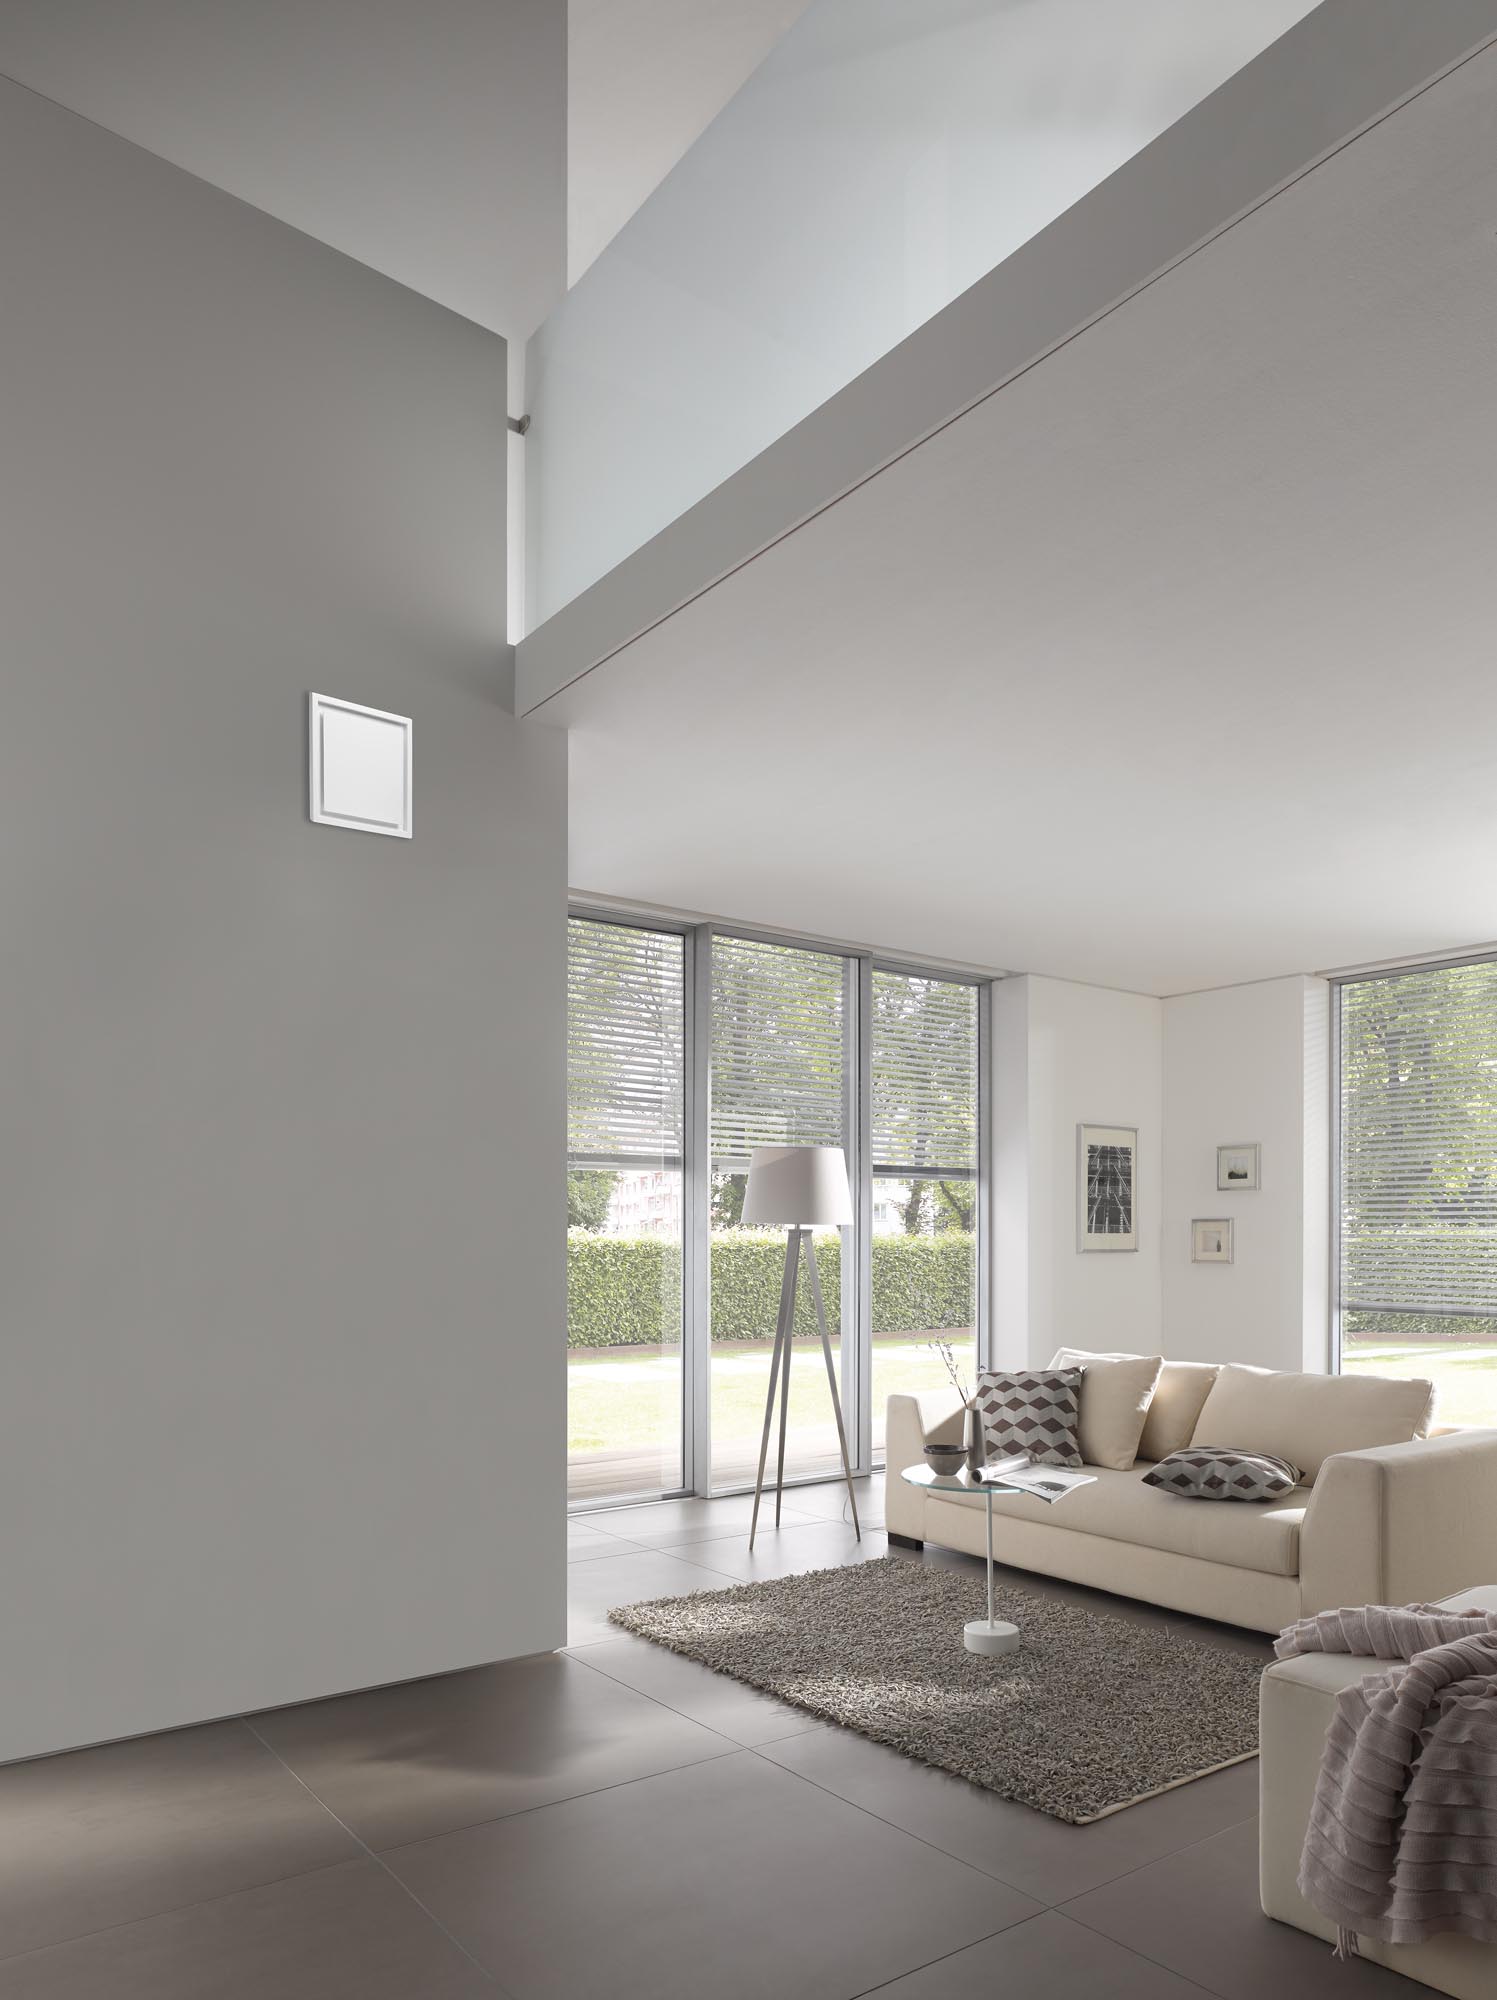 x-well central residential ventilation – a healthy indoor climate for any living situation.